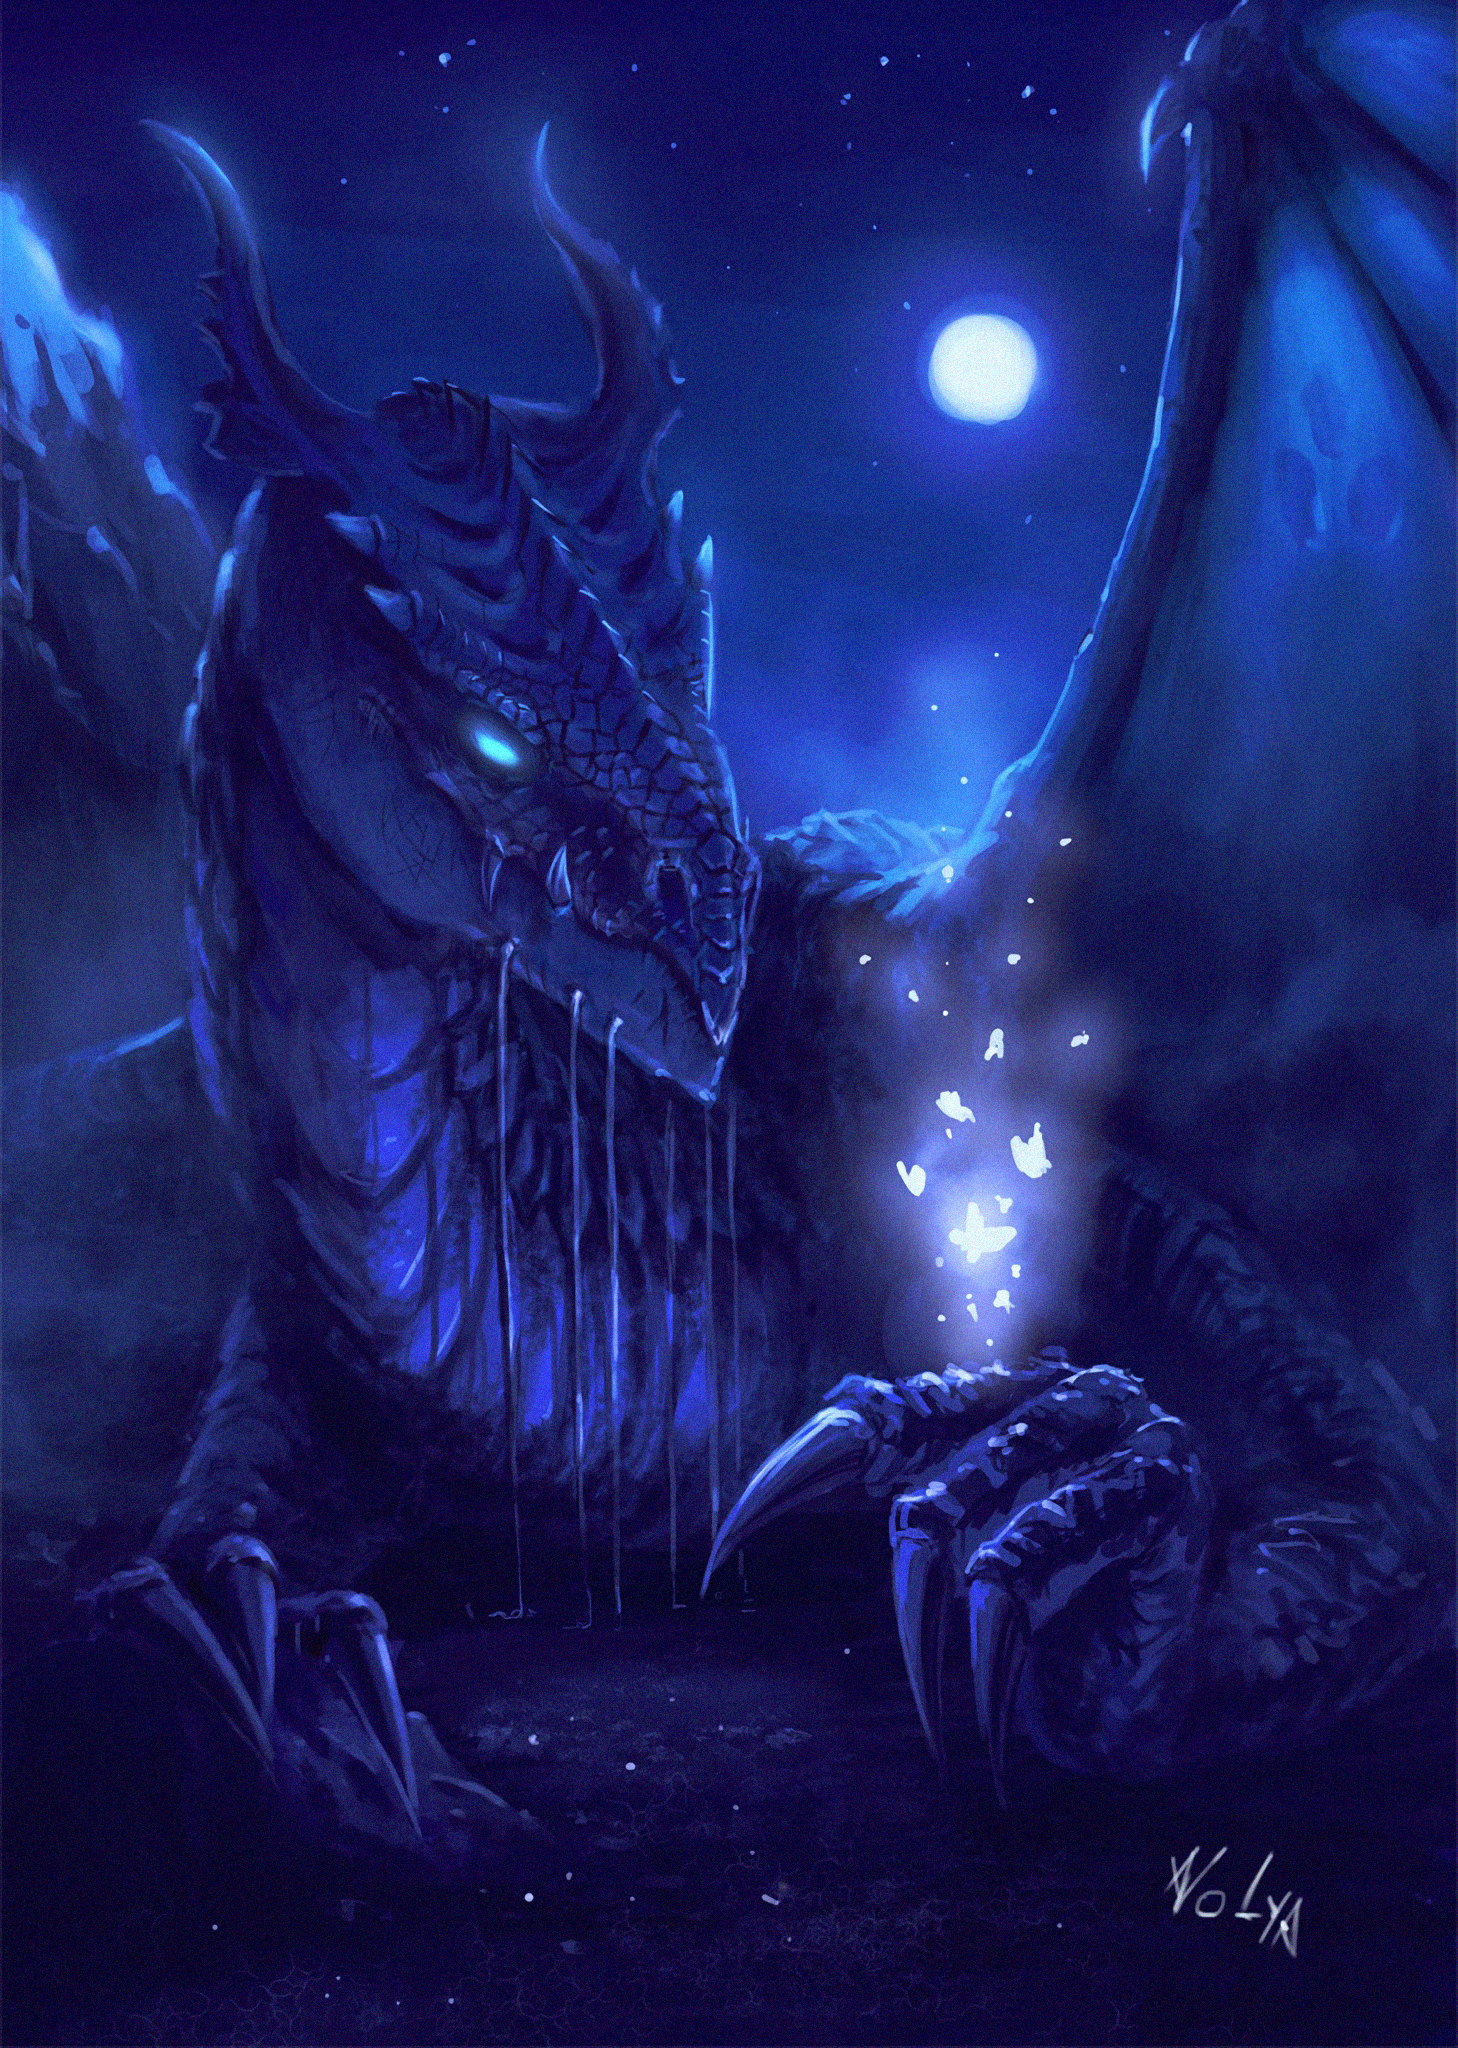 dragon, art, night, being, creature, fantastic images